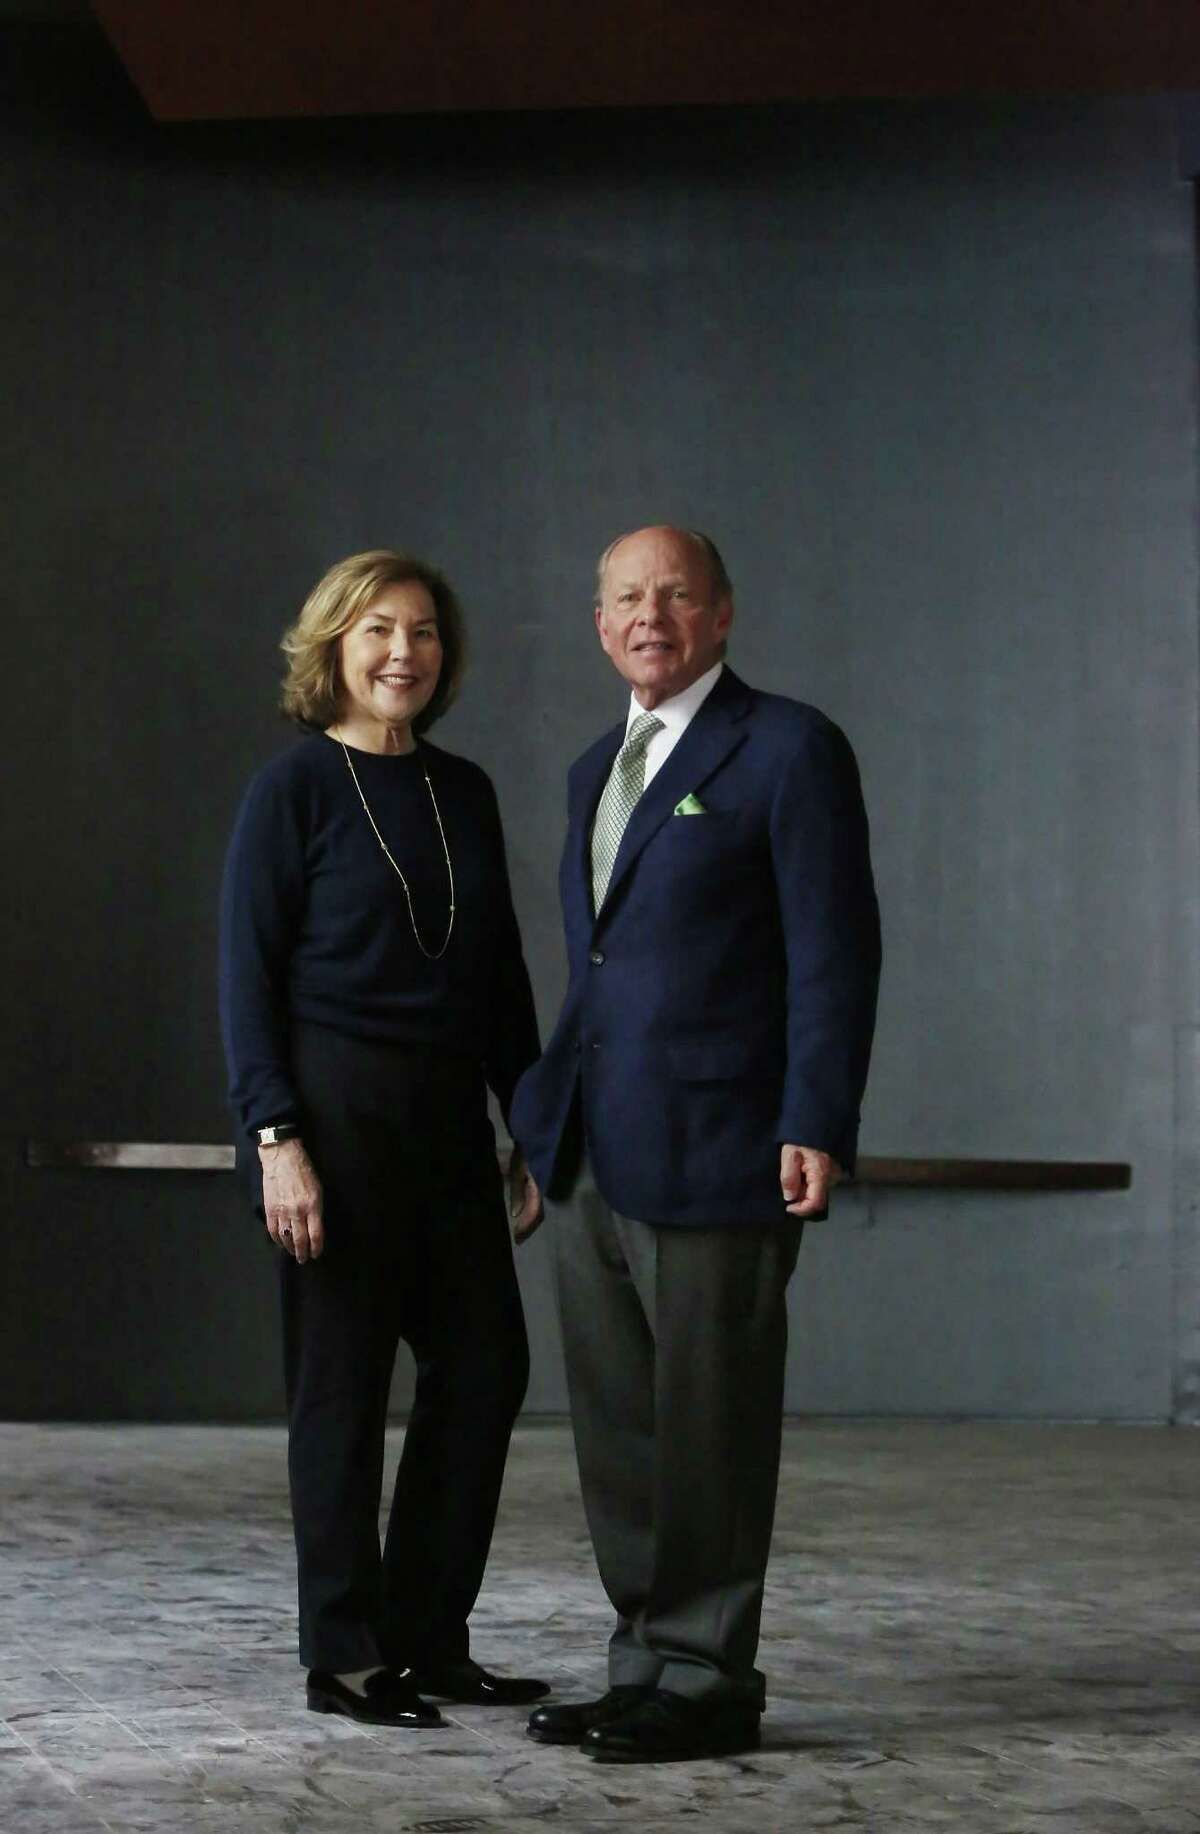 John and Gretchen Berggruen have created an inspiring backdrop for the opening exhibition at the SoMa site.